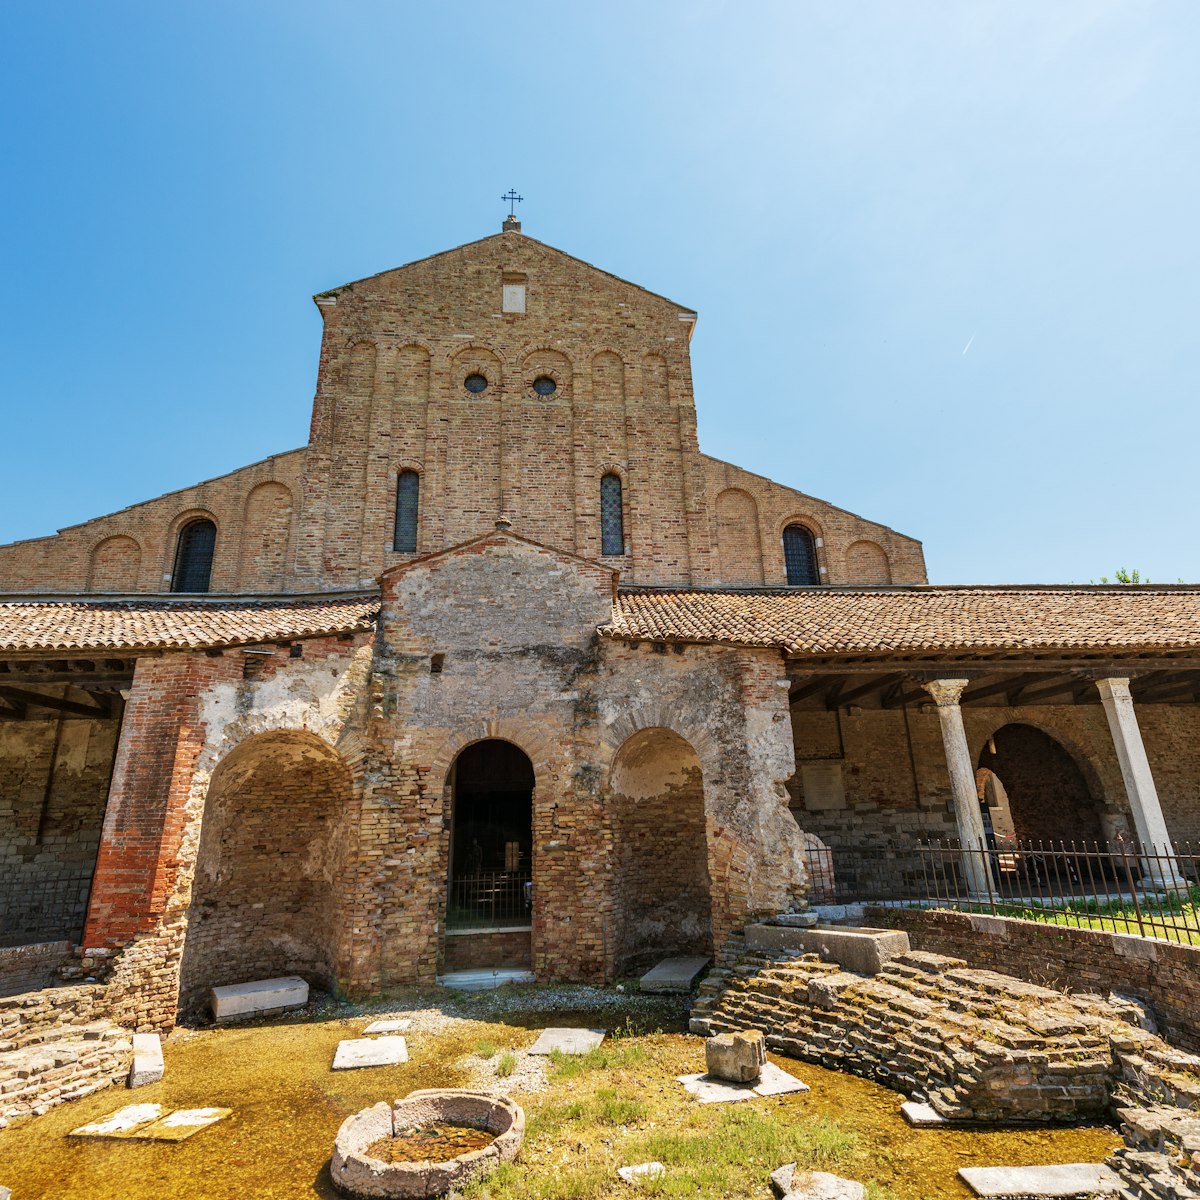 Torcello island, Basilica and Cathedral of Santa Maria Assunta in Venetian-Byzantine style (639), one of the oldest churches in Venice, and the Church of Santa Fosca (IX-XII century), Venice lagoon, UNESCO world heritage site, Veneto, Italy, Europe.
1459295311